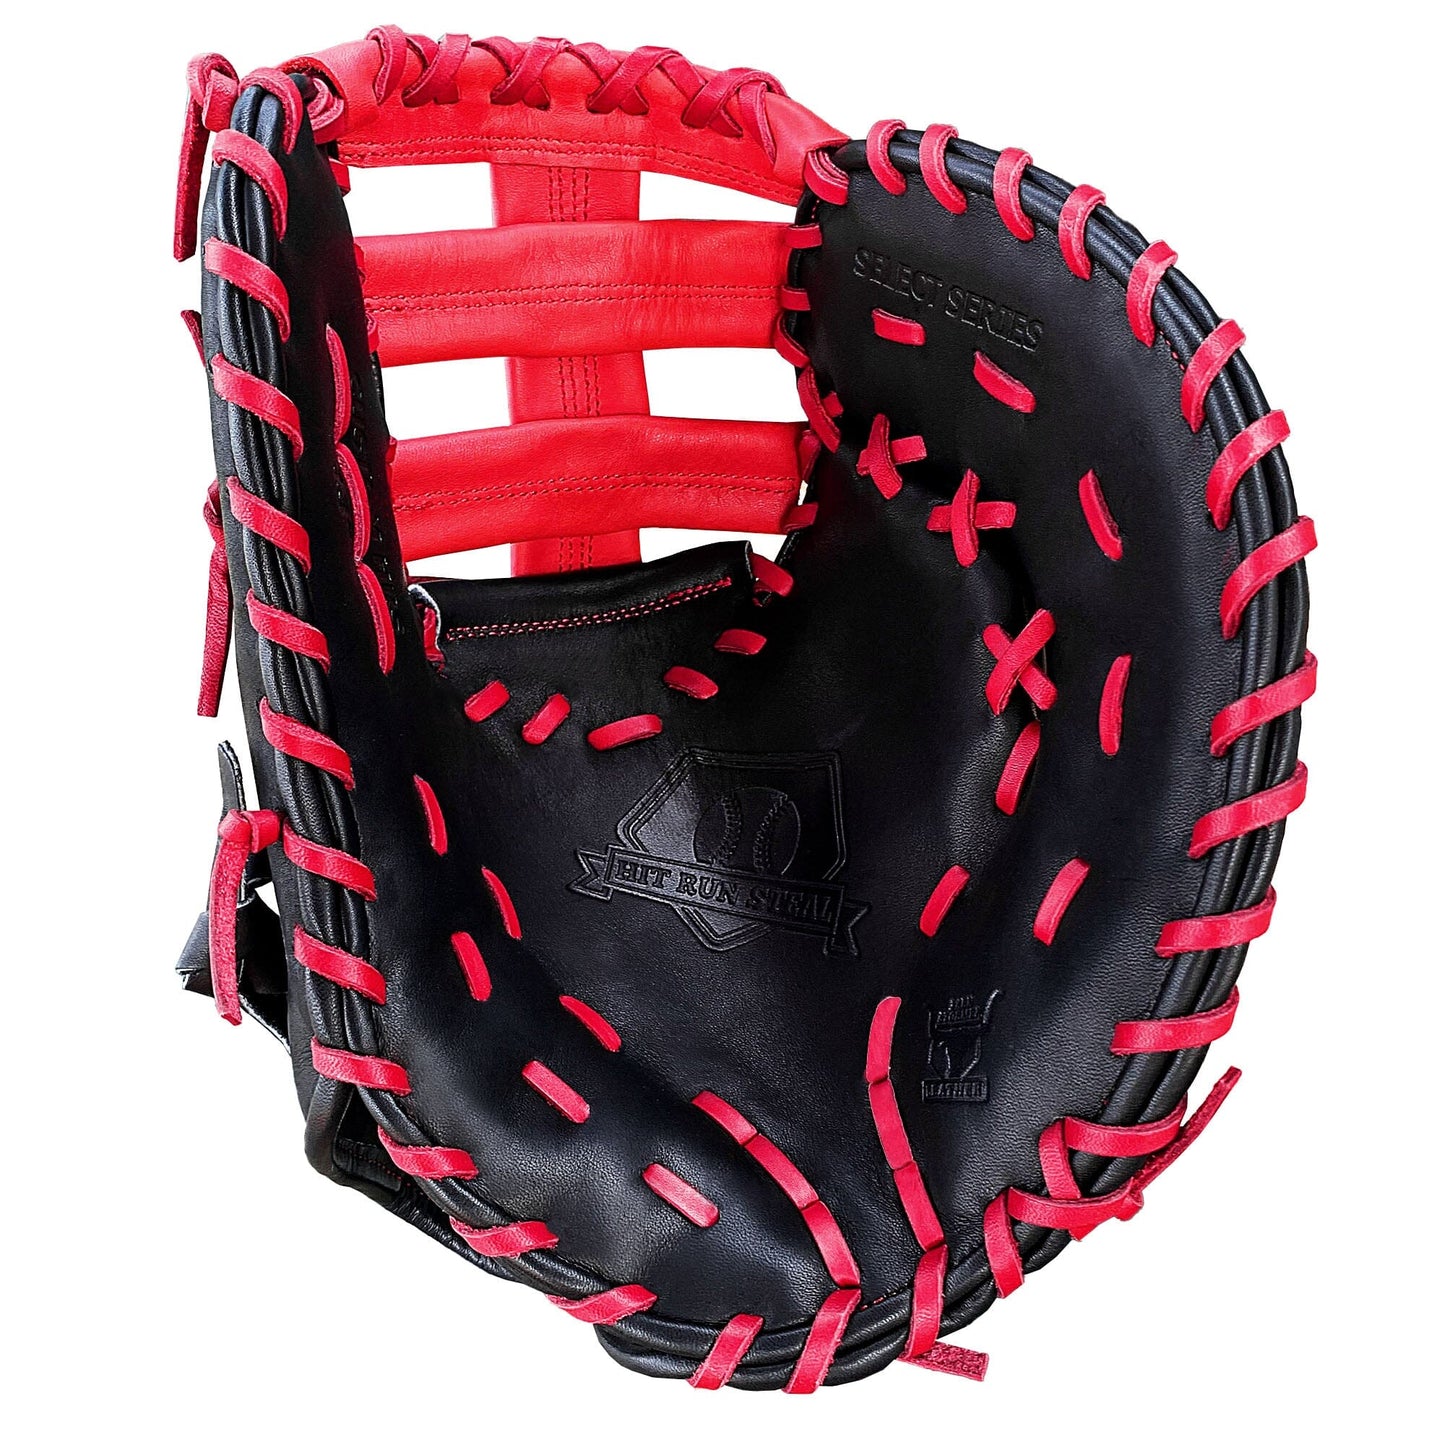 13" Baseball First Base Mitt - Black with Red Web